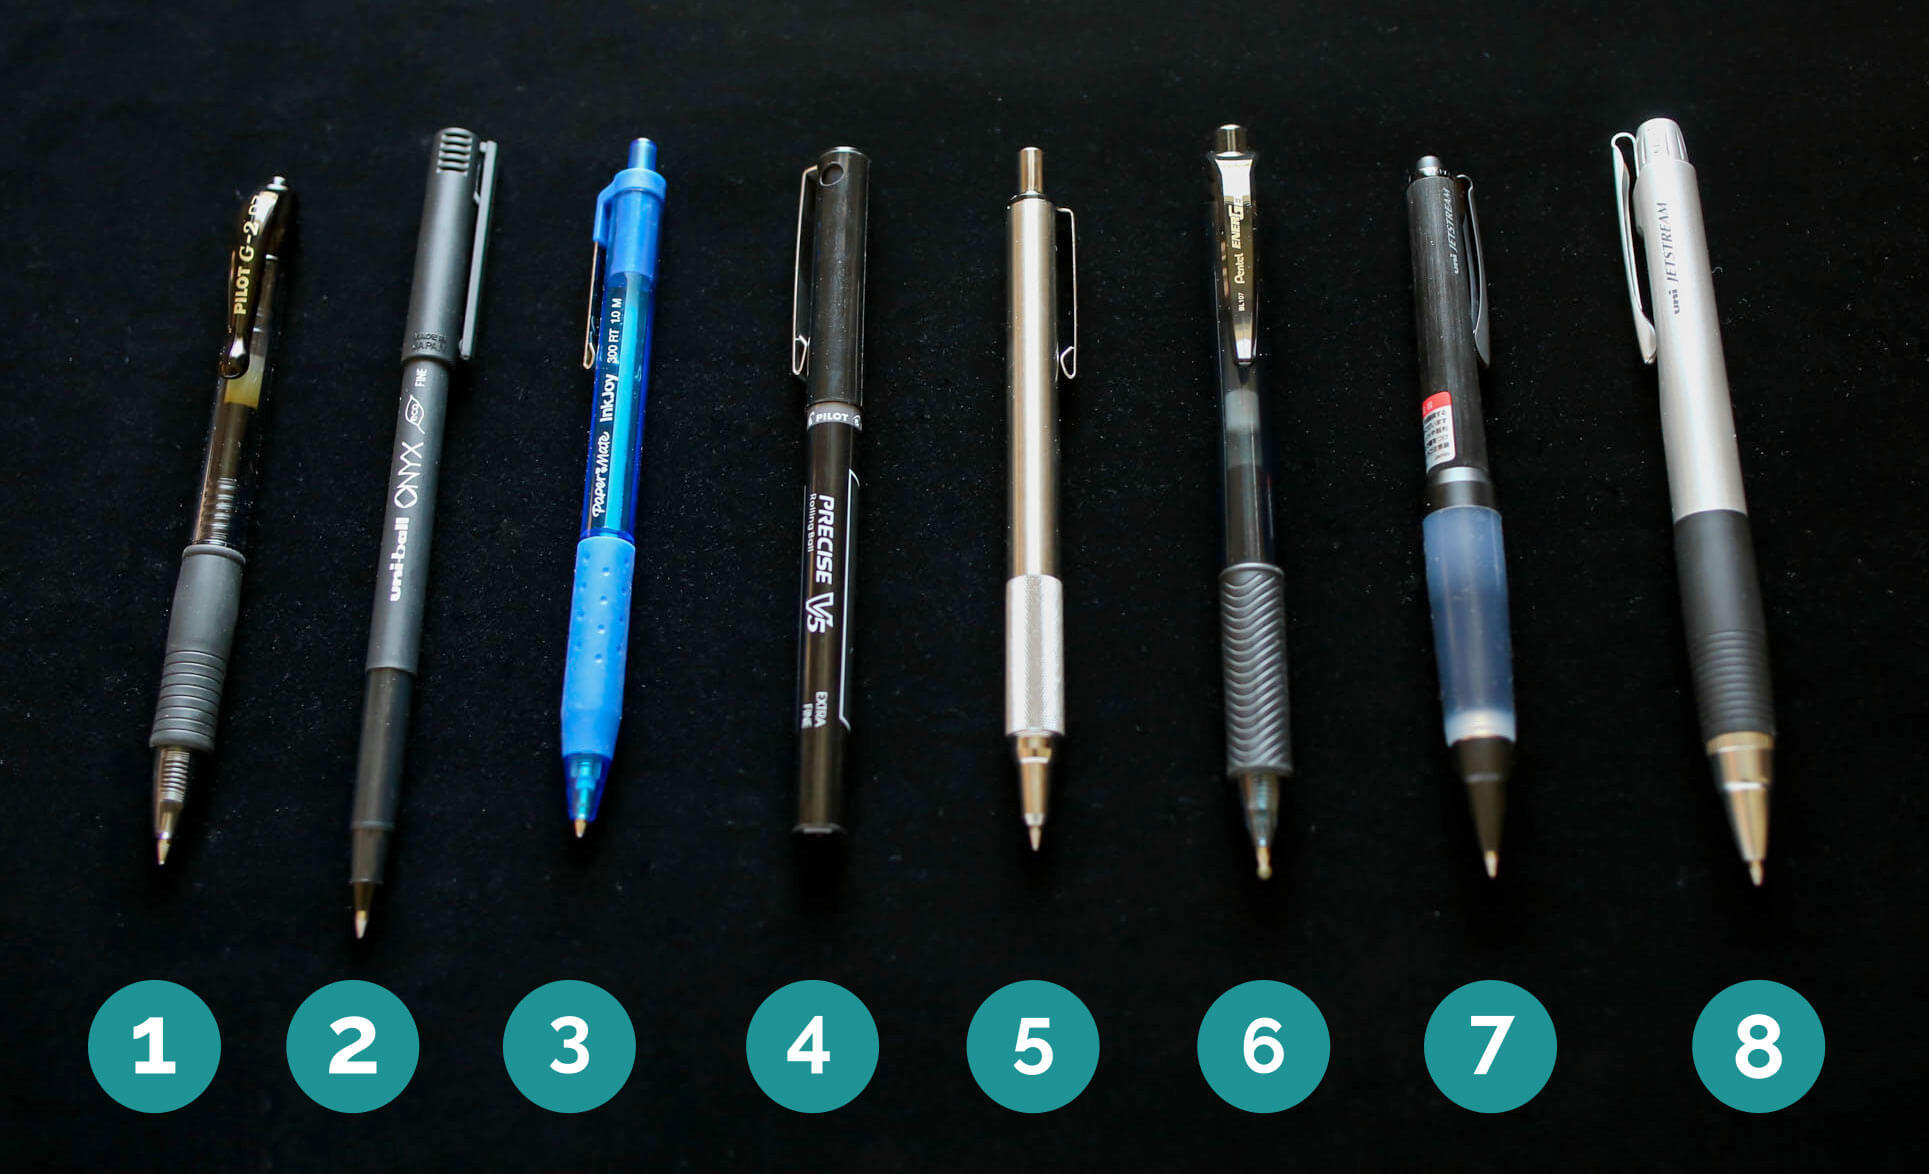 What is the best colored ink gel pen? My vote is for the pilot g2